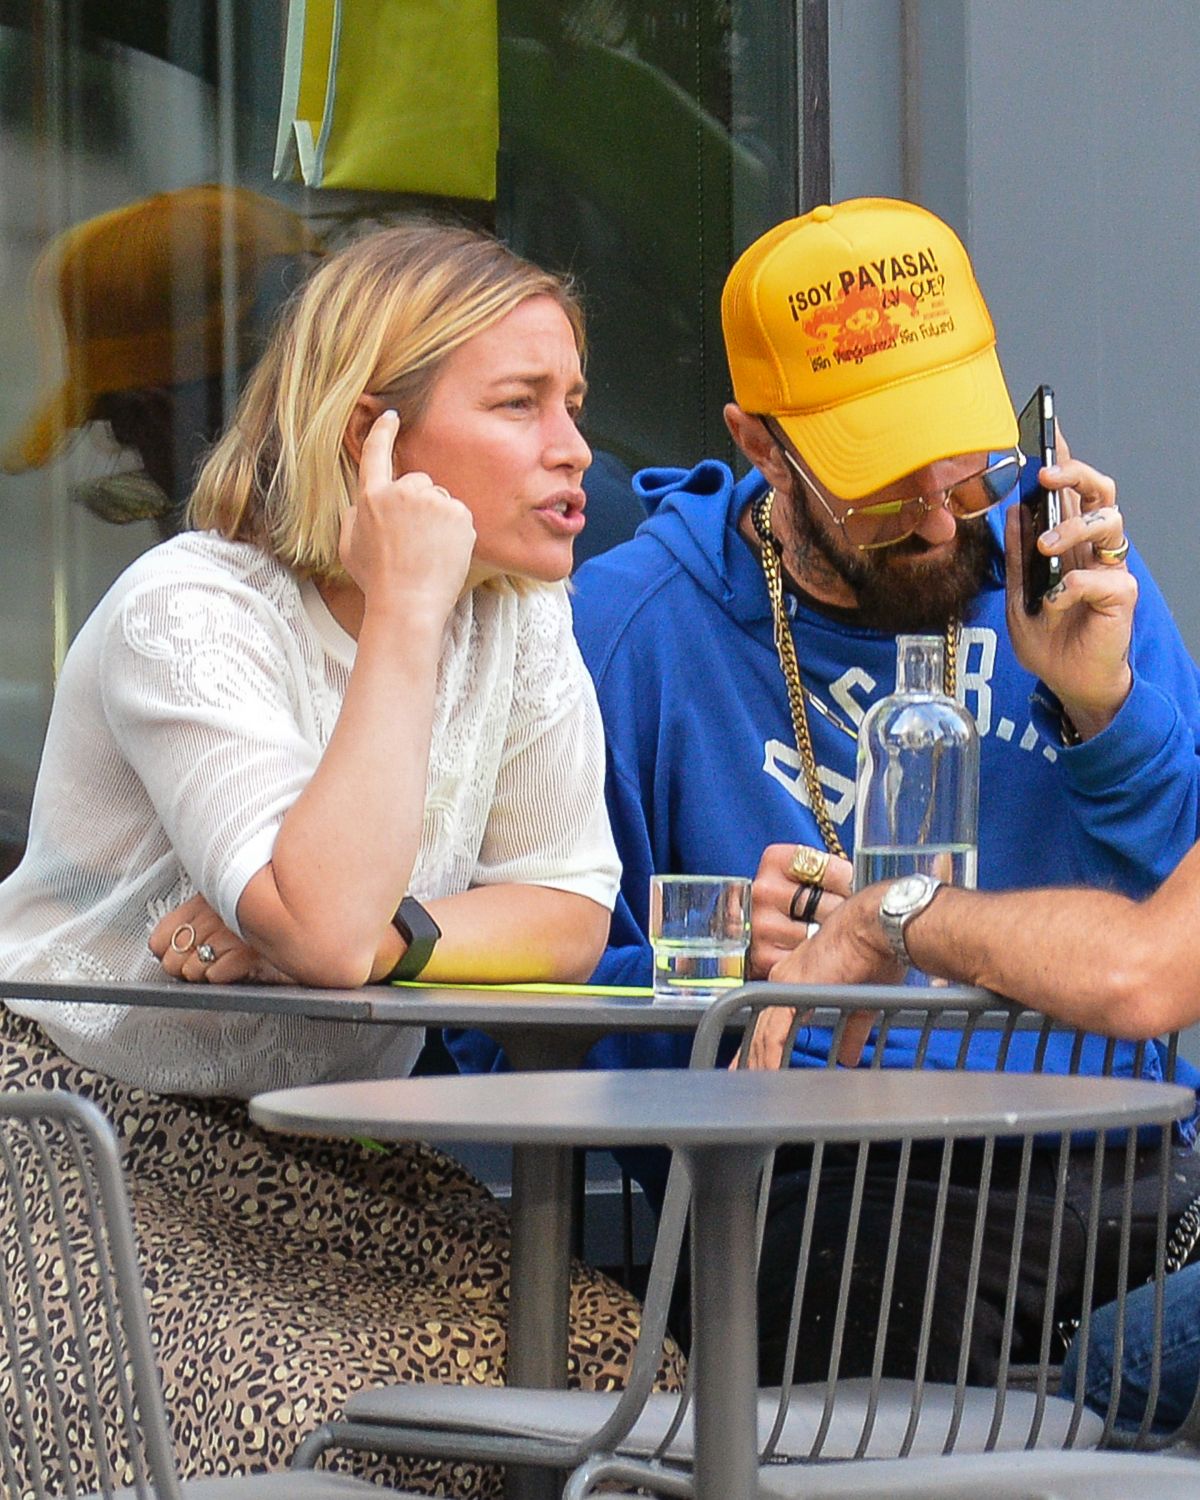 Piper Perabo and Stephen Kay Spotted at Dinner with Friend